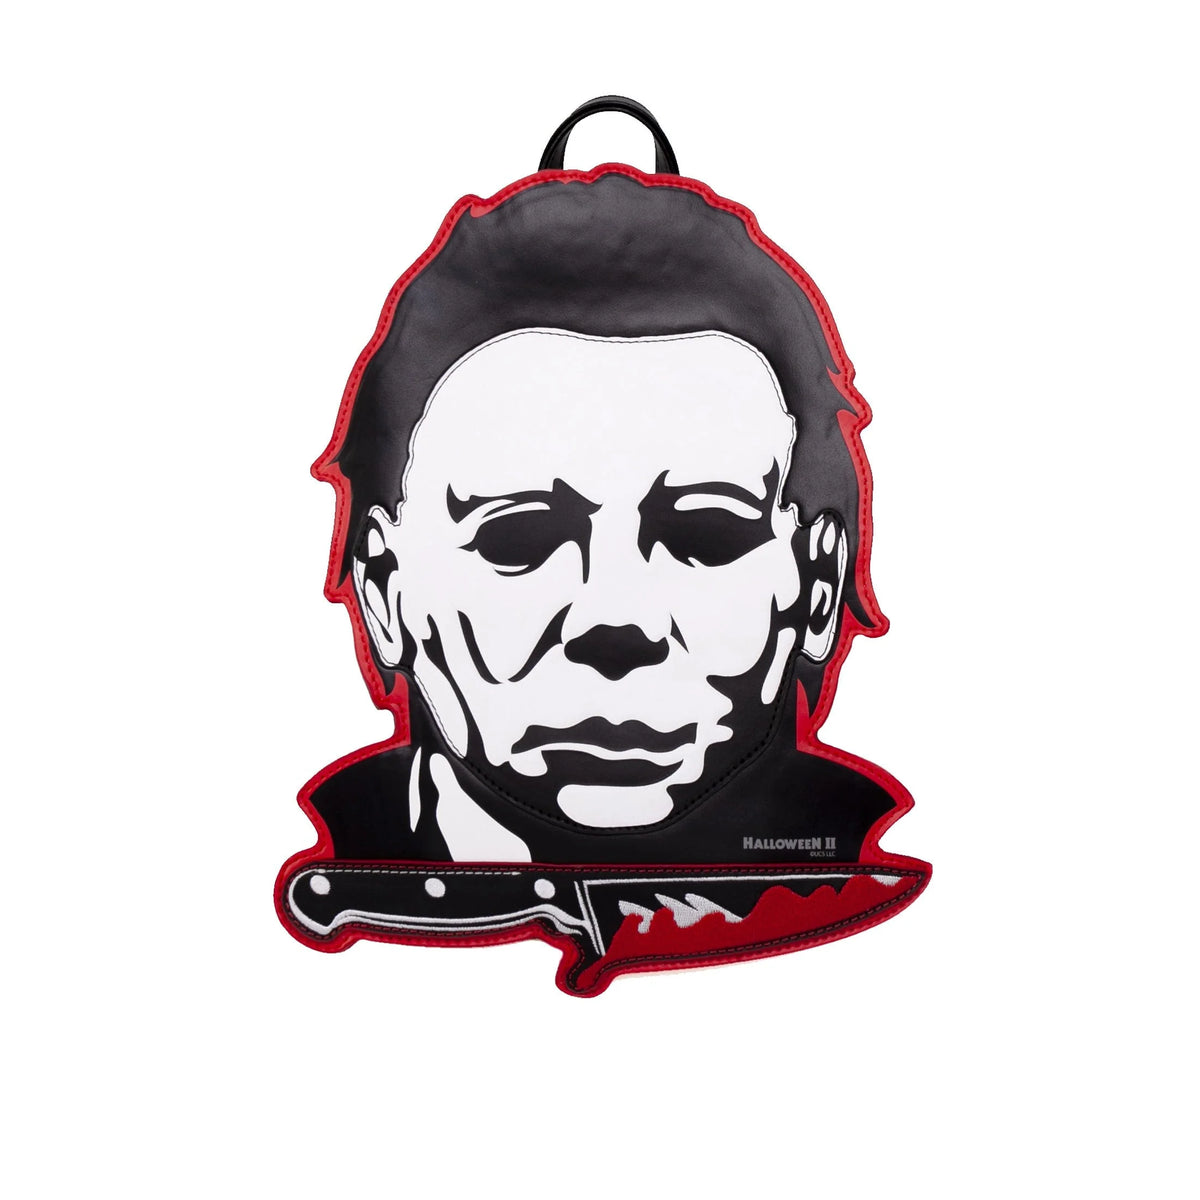 Michael Myers Head Backpack w/ Red Satin Lining